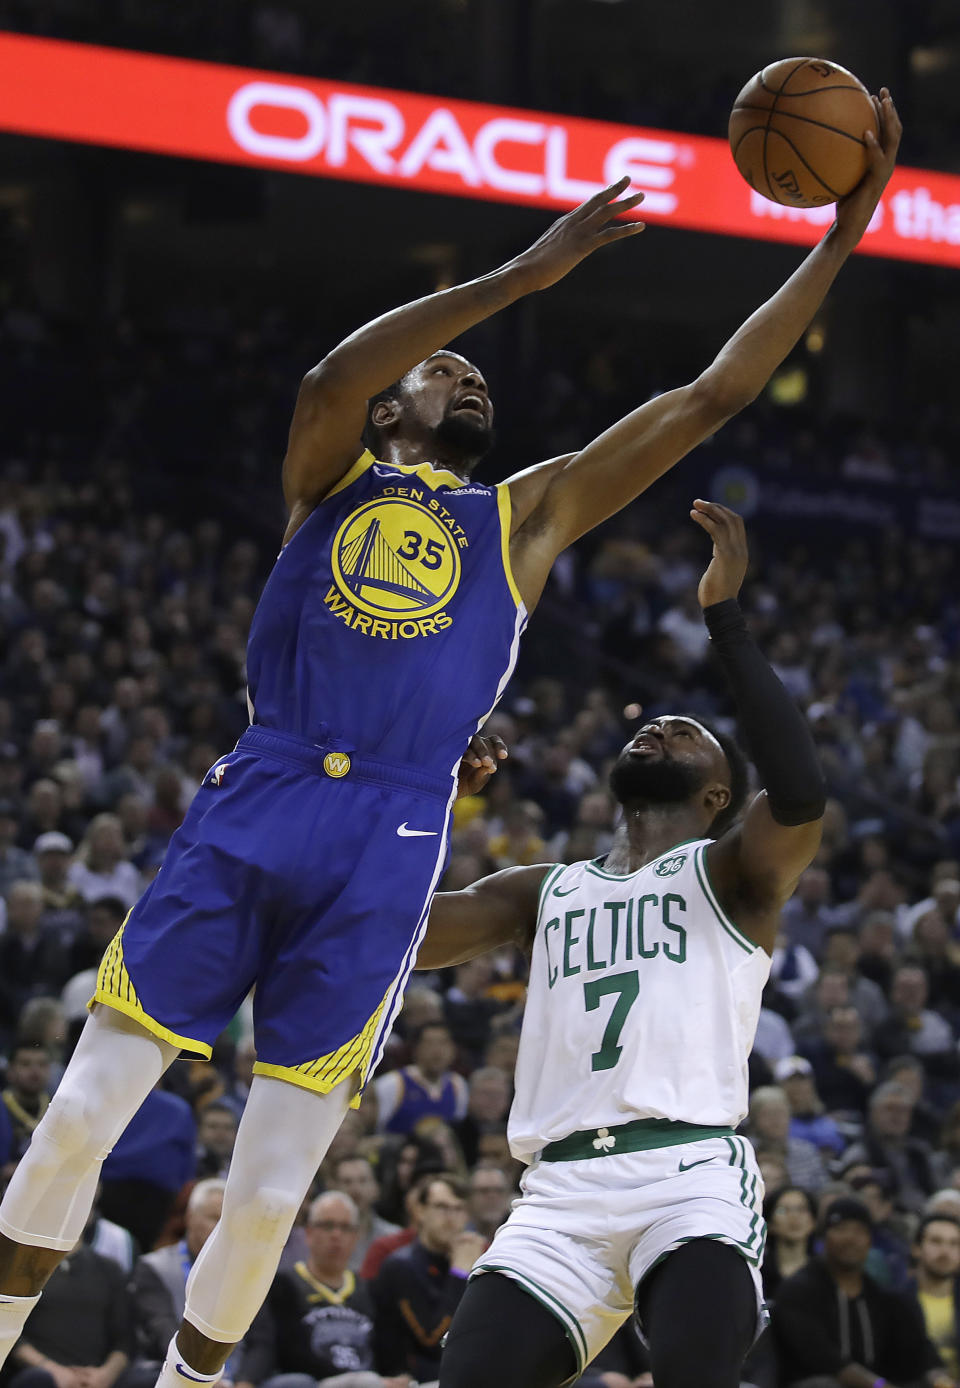 Golden State Warriors' Kevin Durant shoots in front of Boston Celtics' Jaylen Brown (7) during the first half of an NBA basketball game Tuesday, March 5, 2019, in Oakland, Calif. (AP Photo/Ben Margot)